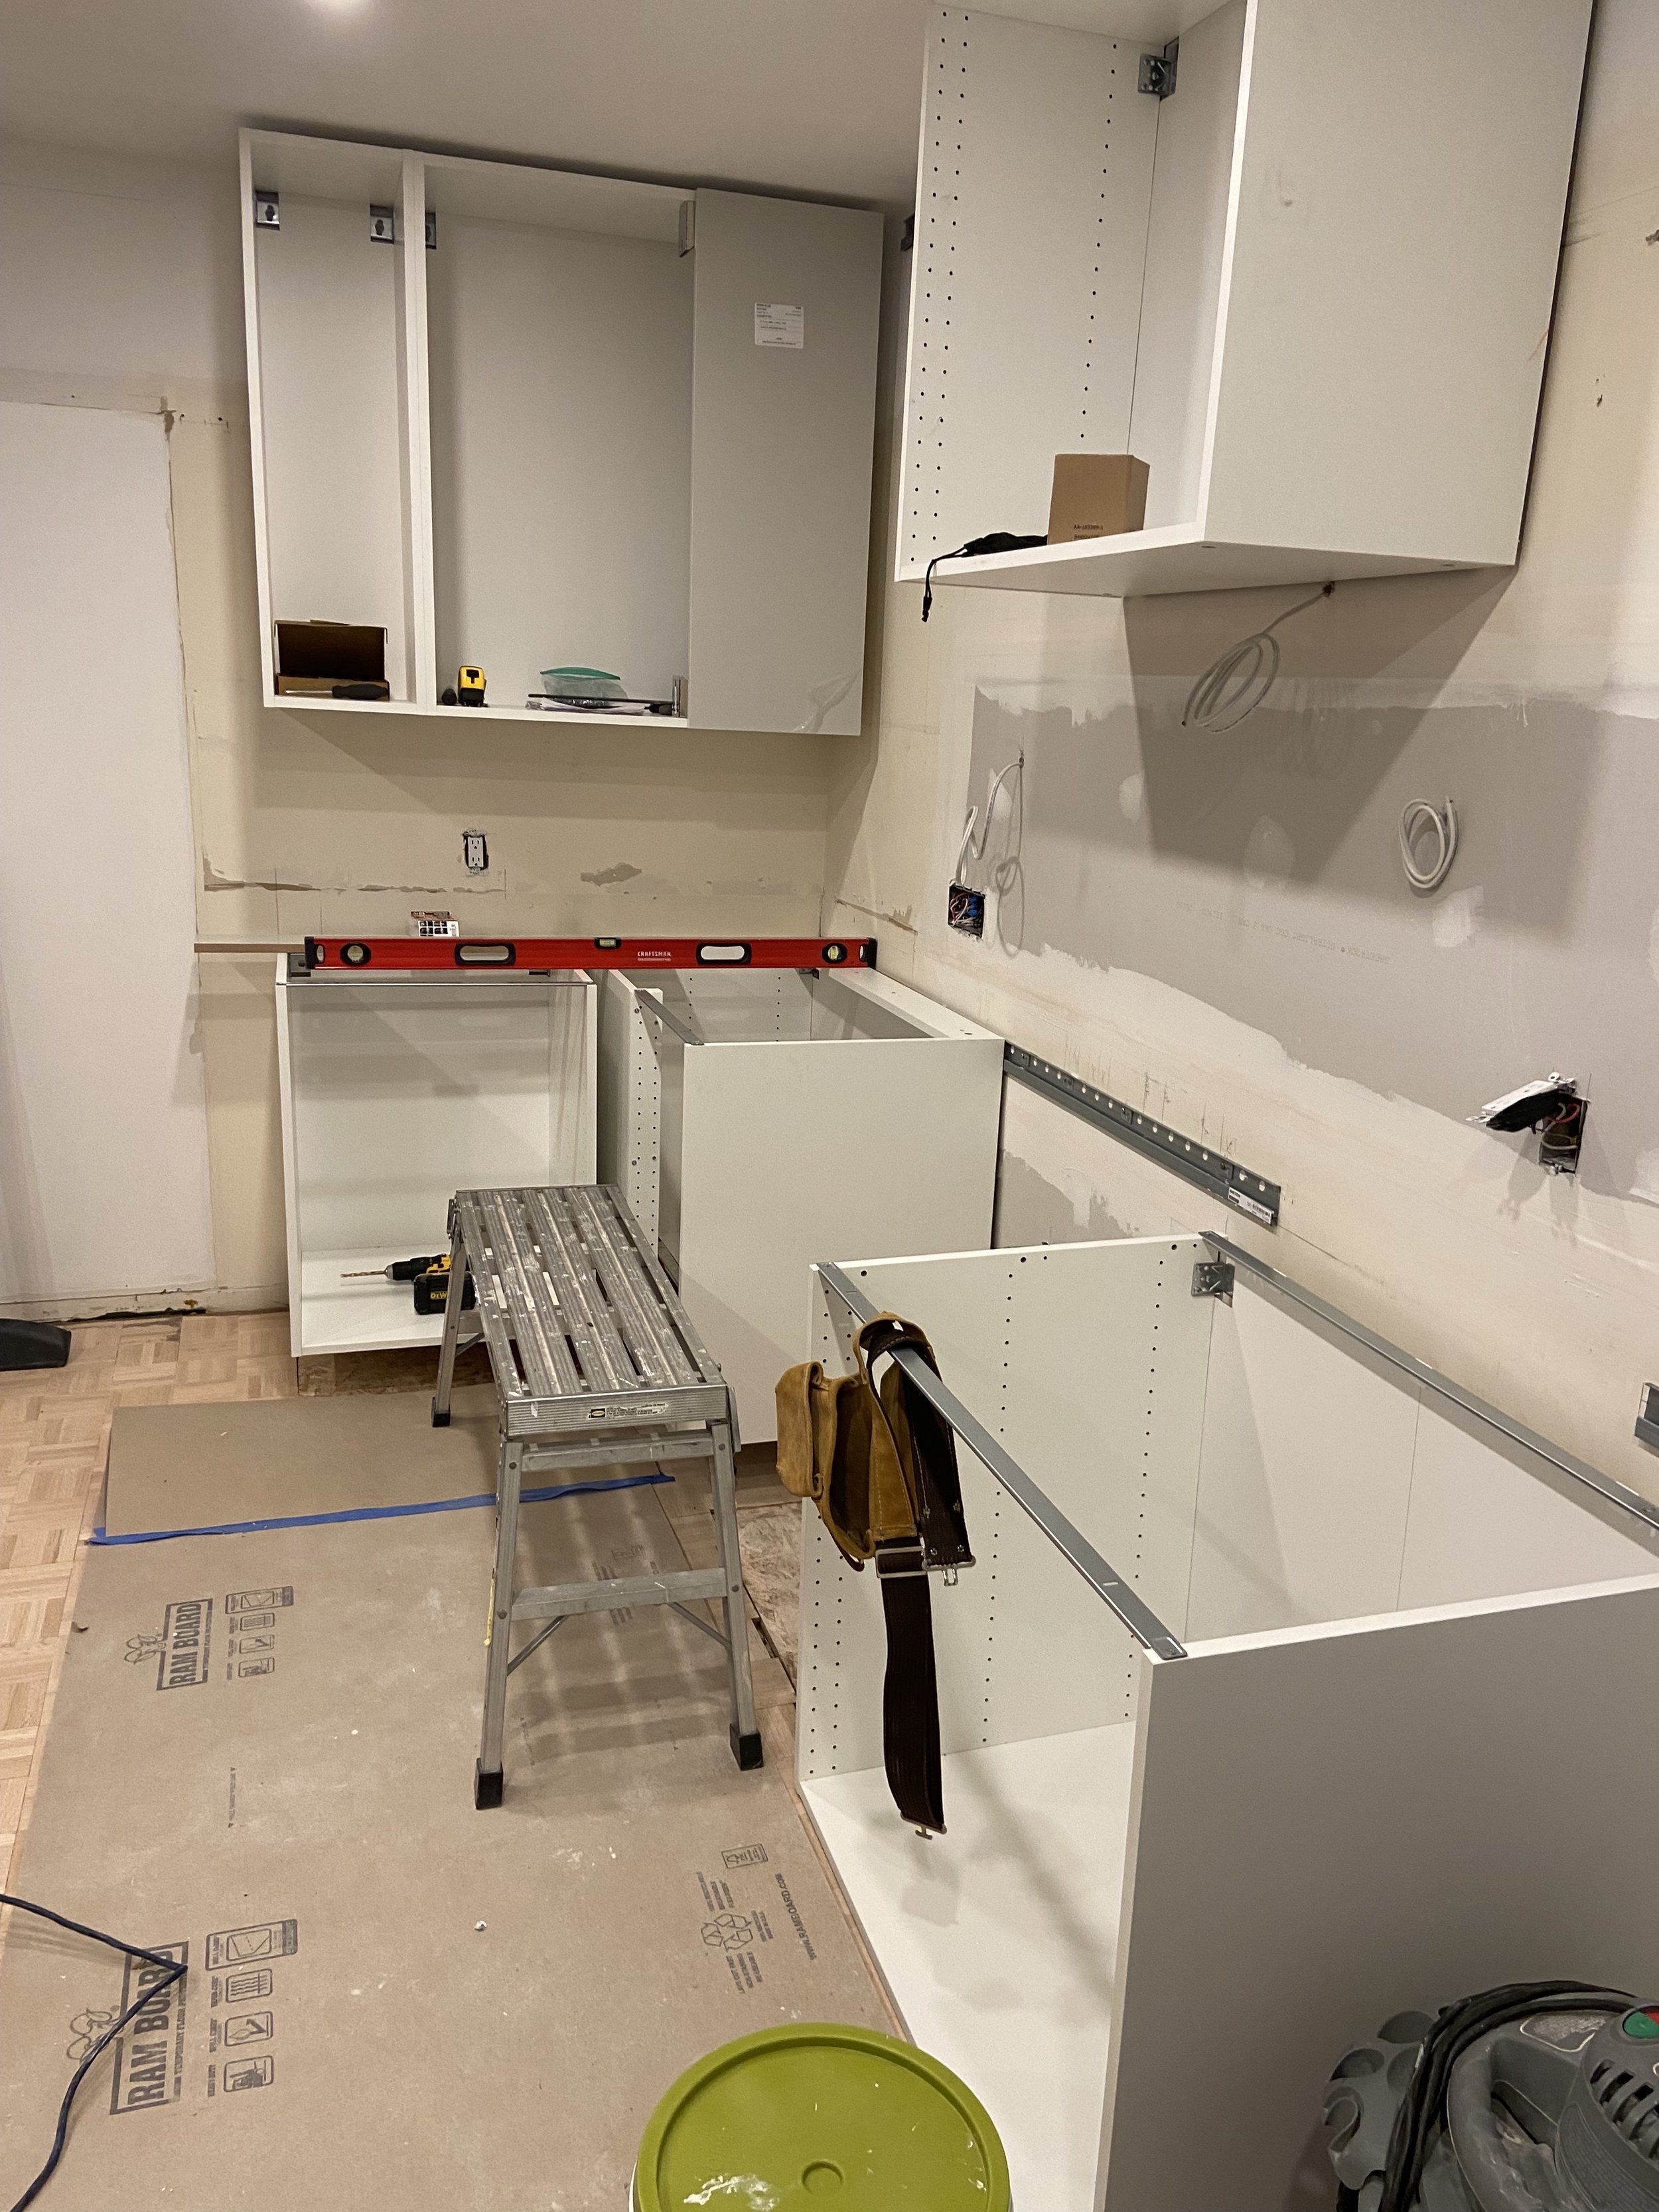 Condo Kitchen Renovation in Ramsay Heights